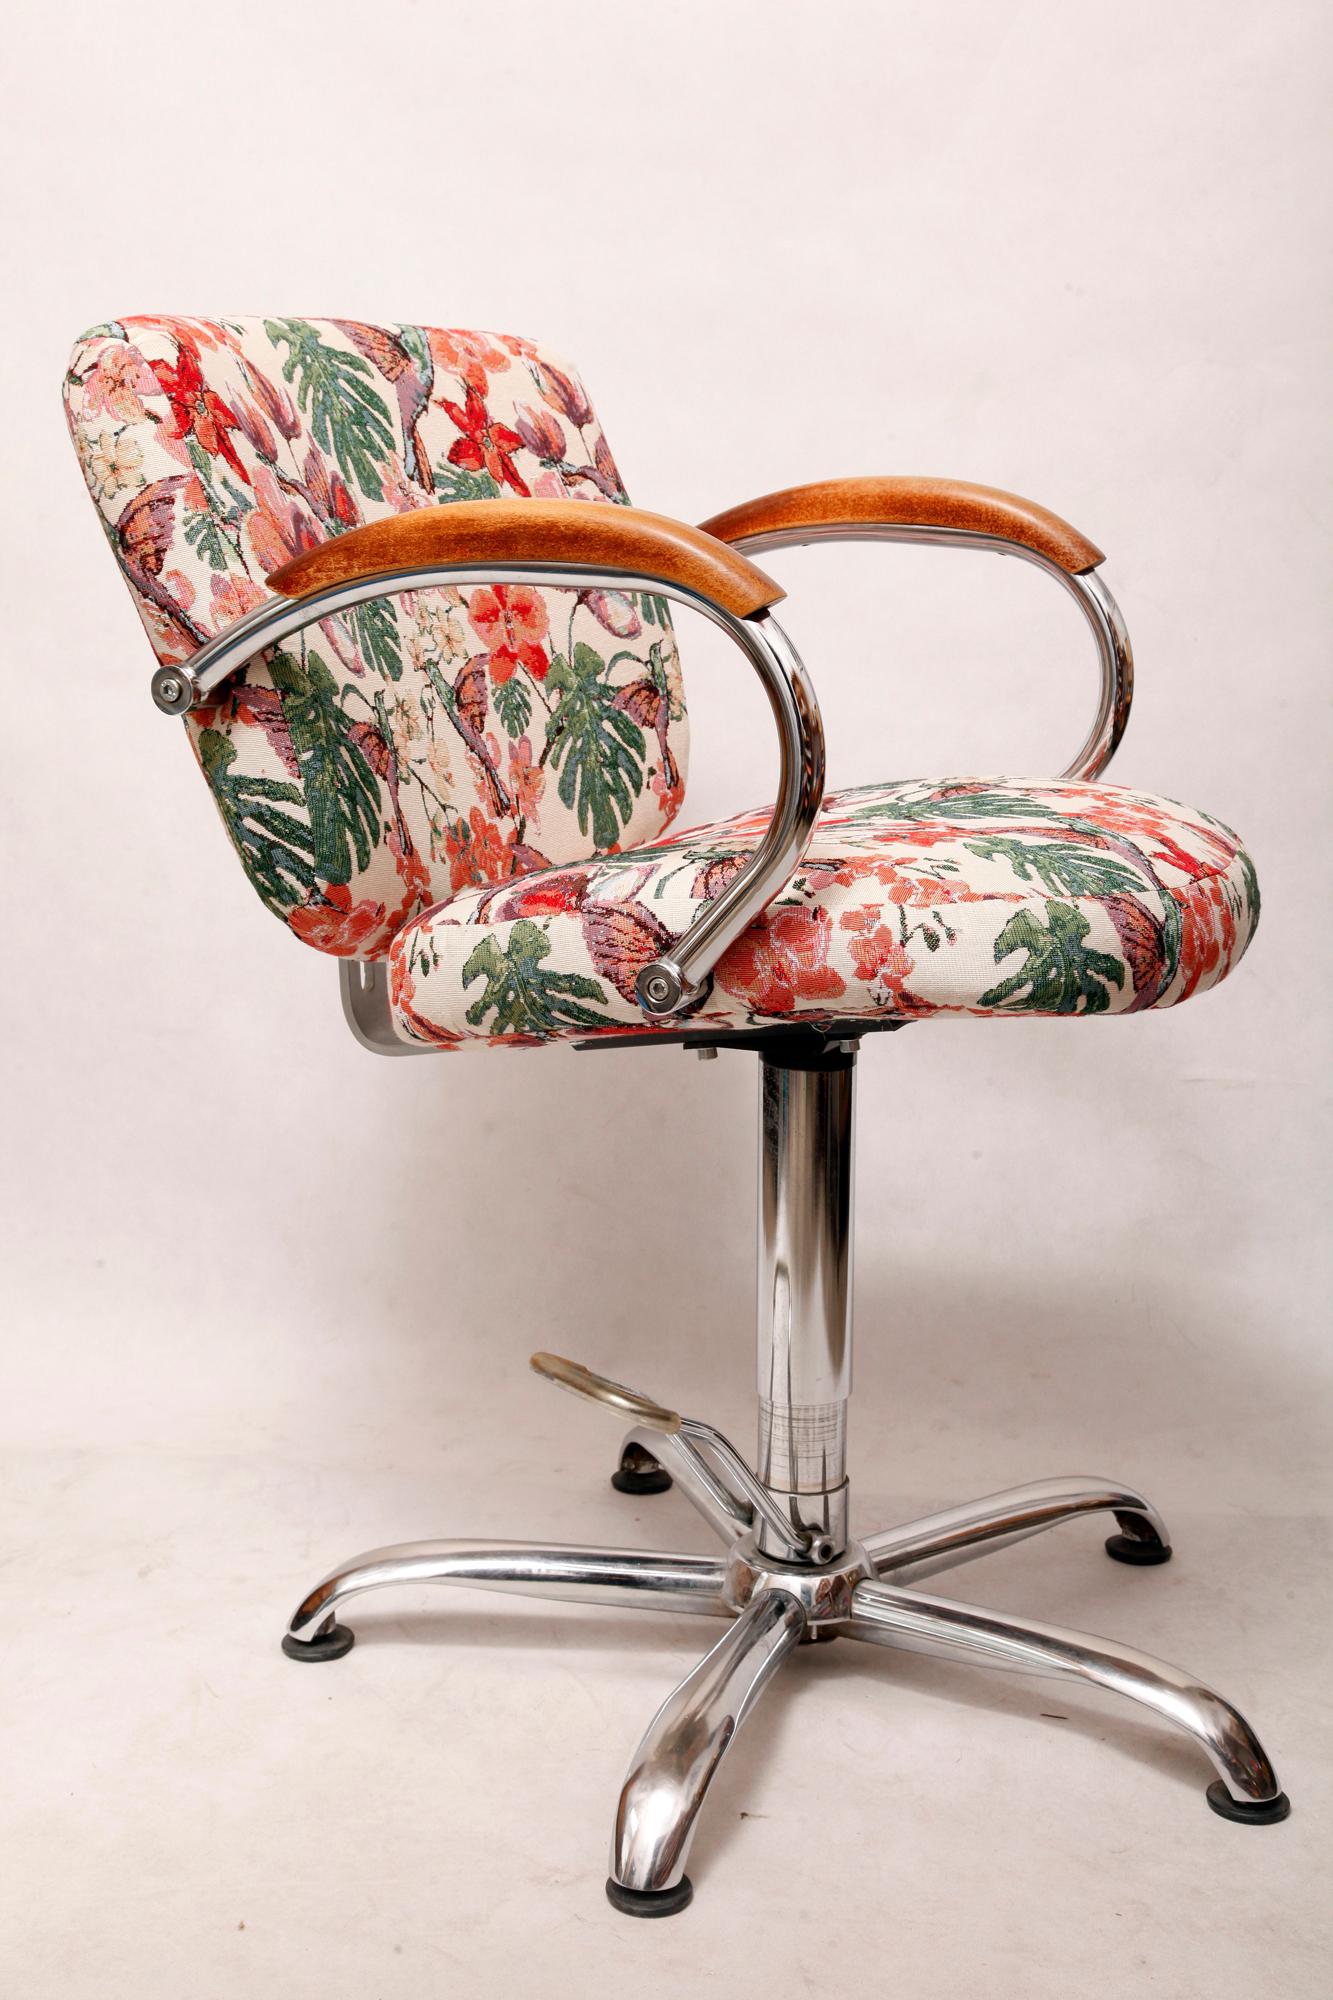 Art Deco Elegant, Rotating Hairdressing Chair in Colored Upholstery, Germany, 1980s For Sale